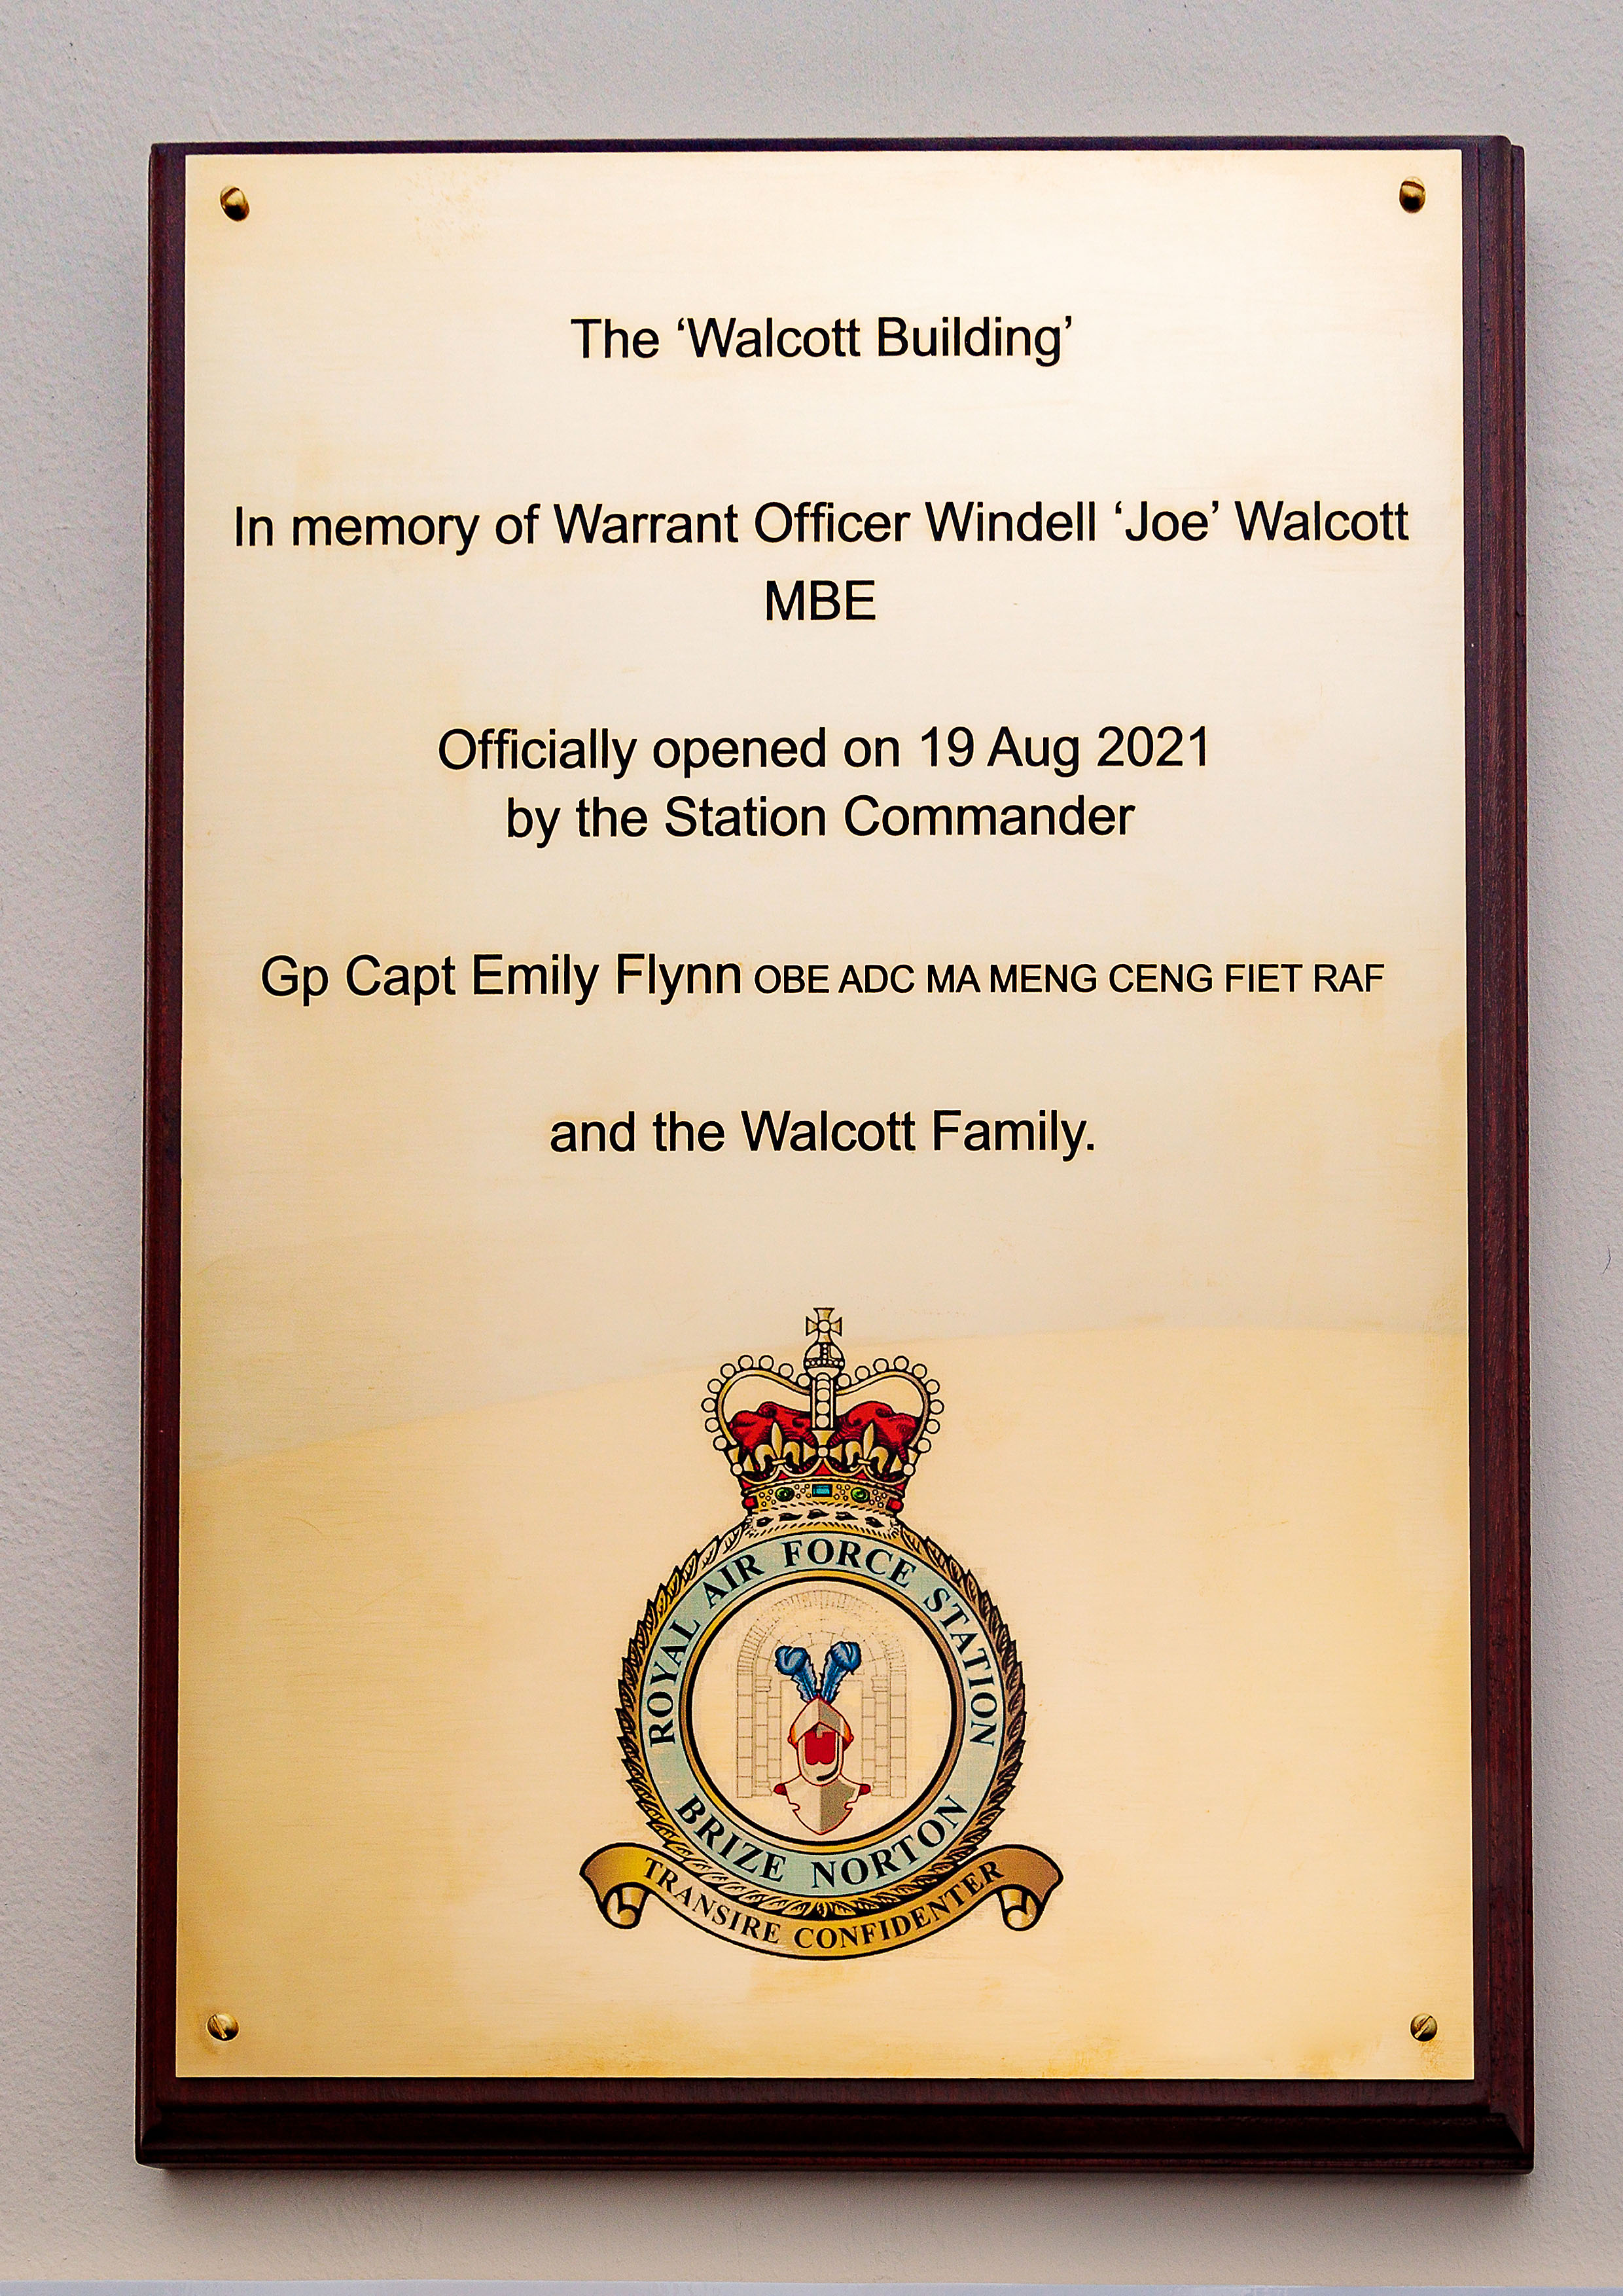 The plaque, commemorating Warrant Officer Windell